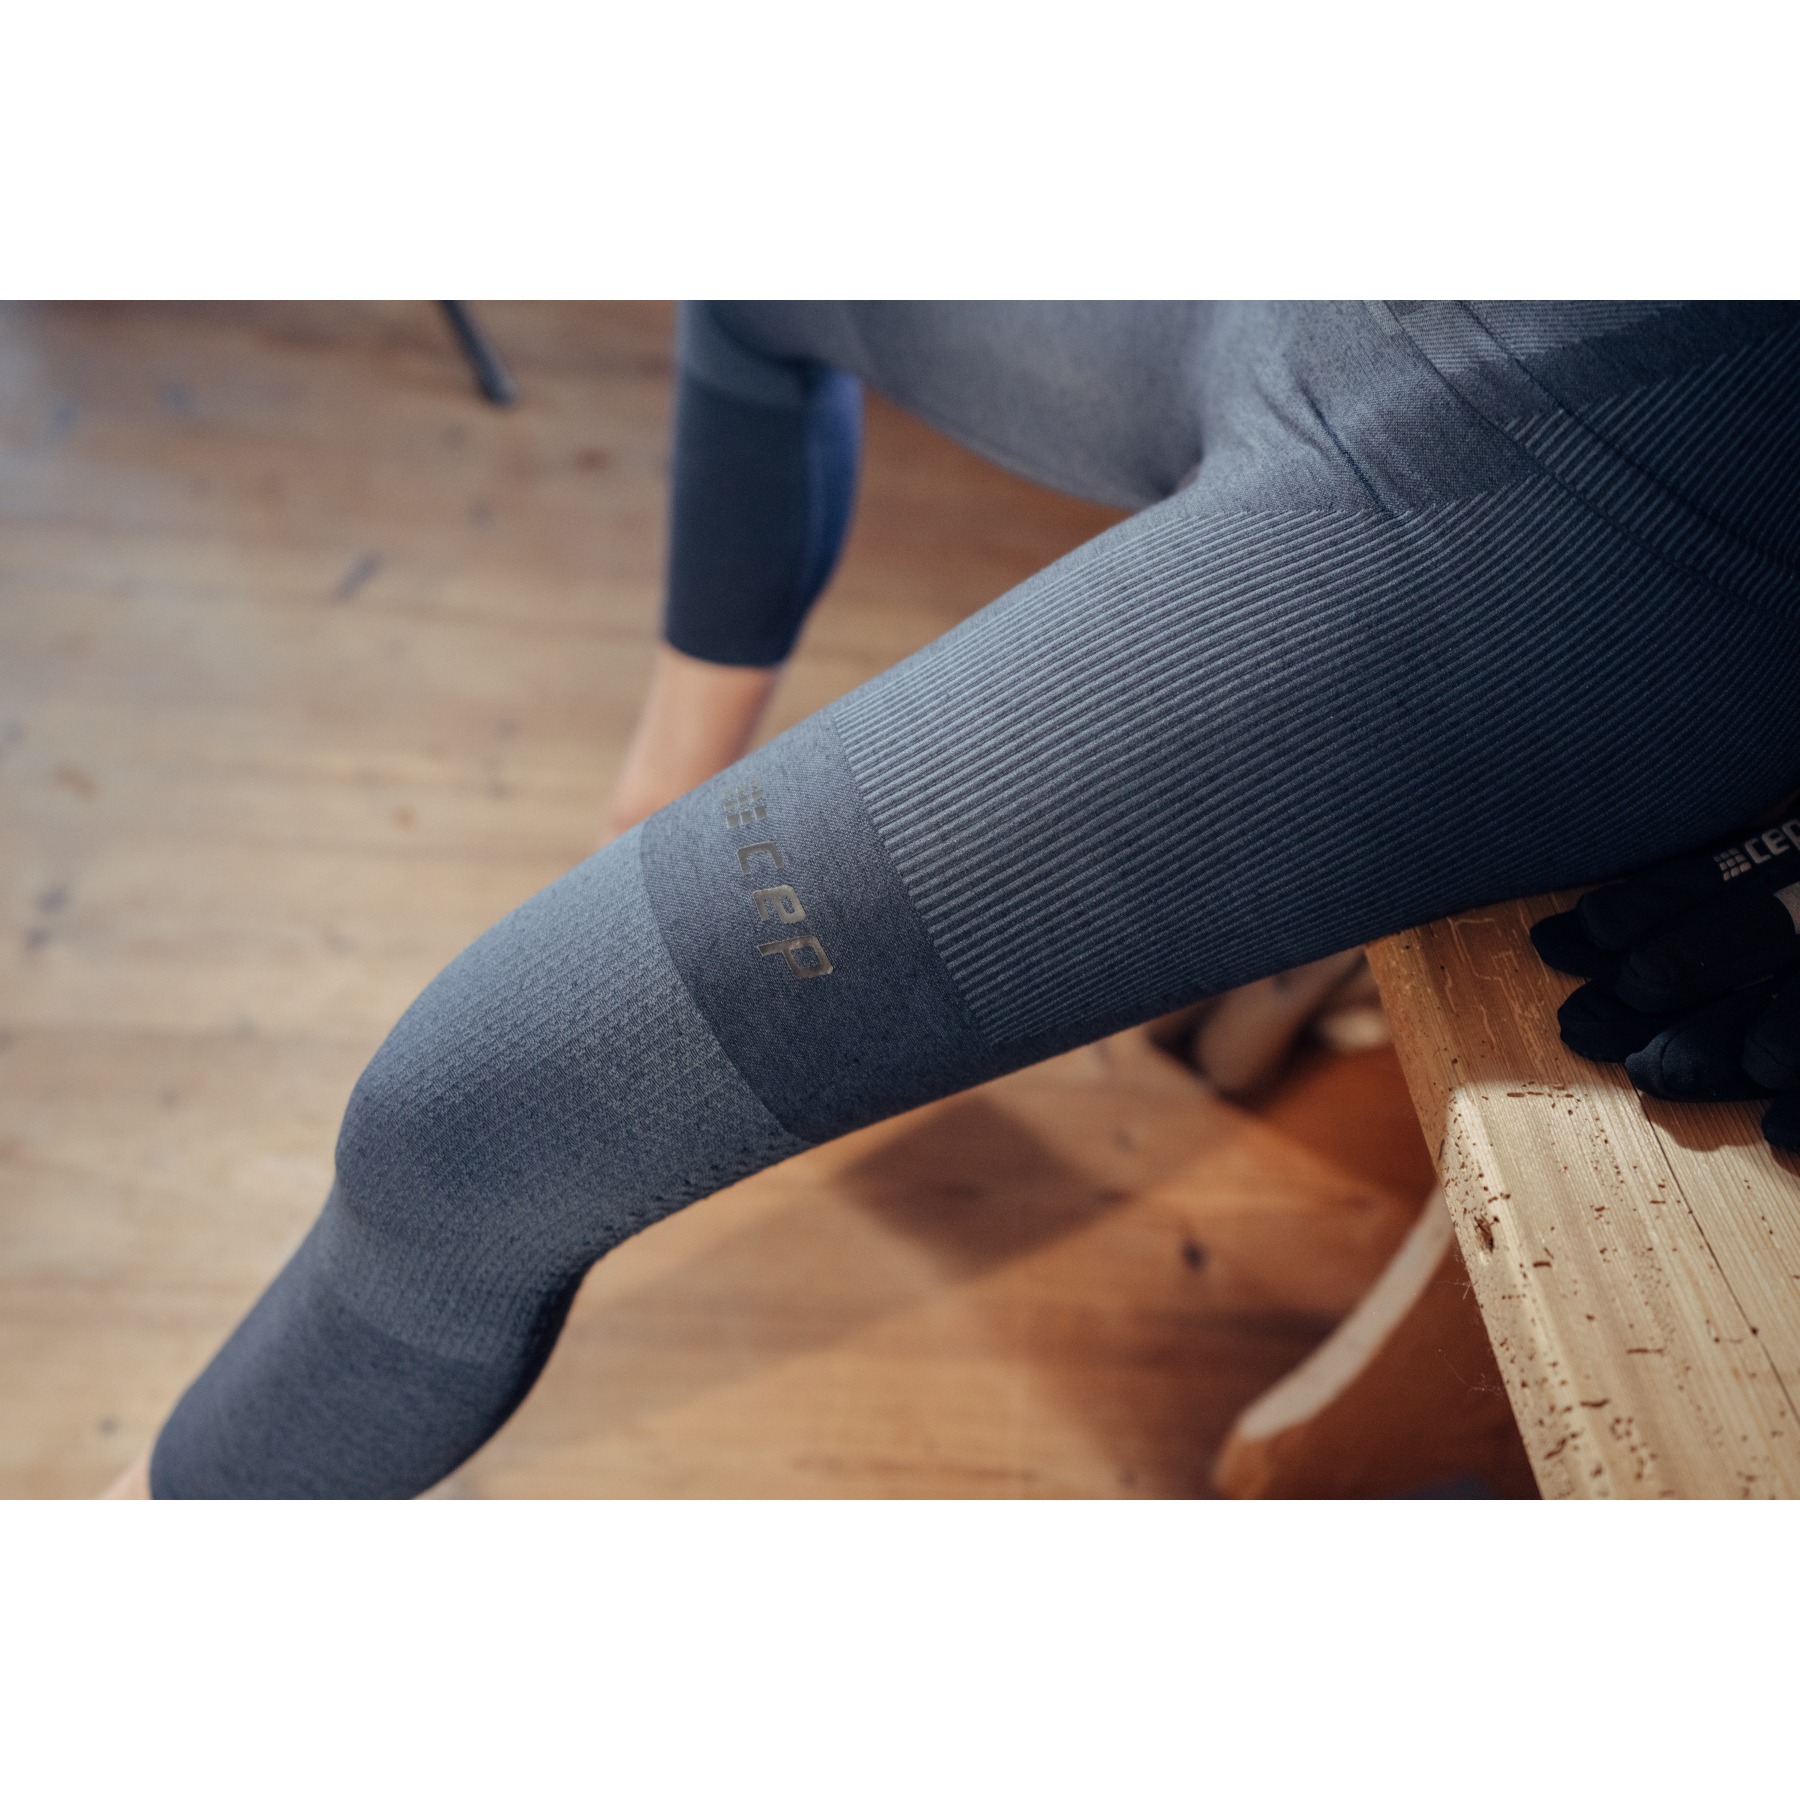 Legging for cold temperatures CEP Compression - Leggings / Tights - The  Stockings - Mens Clothing